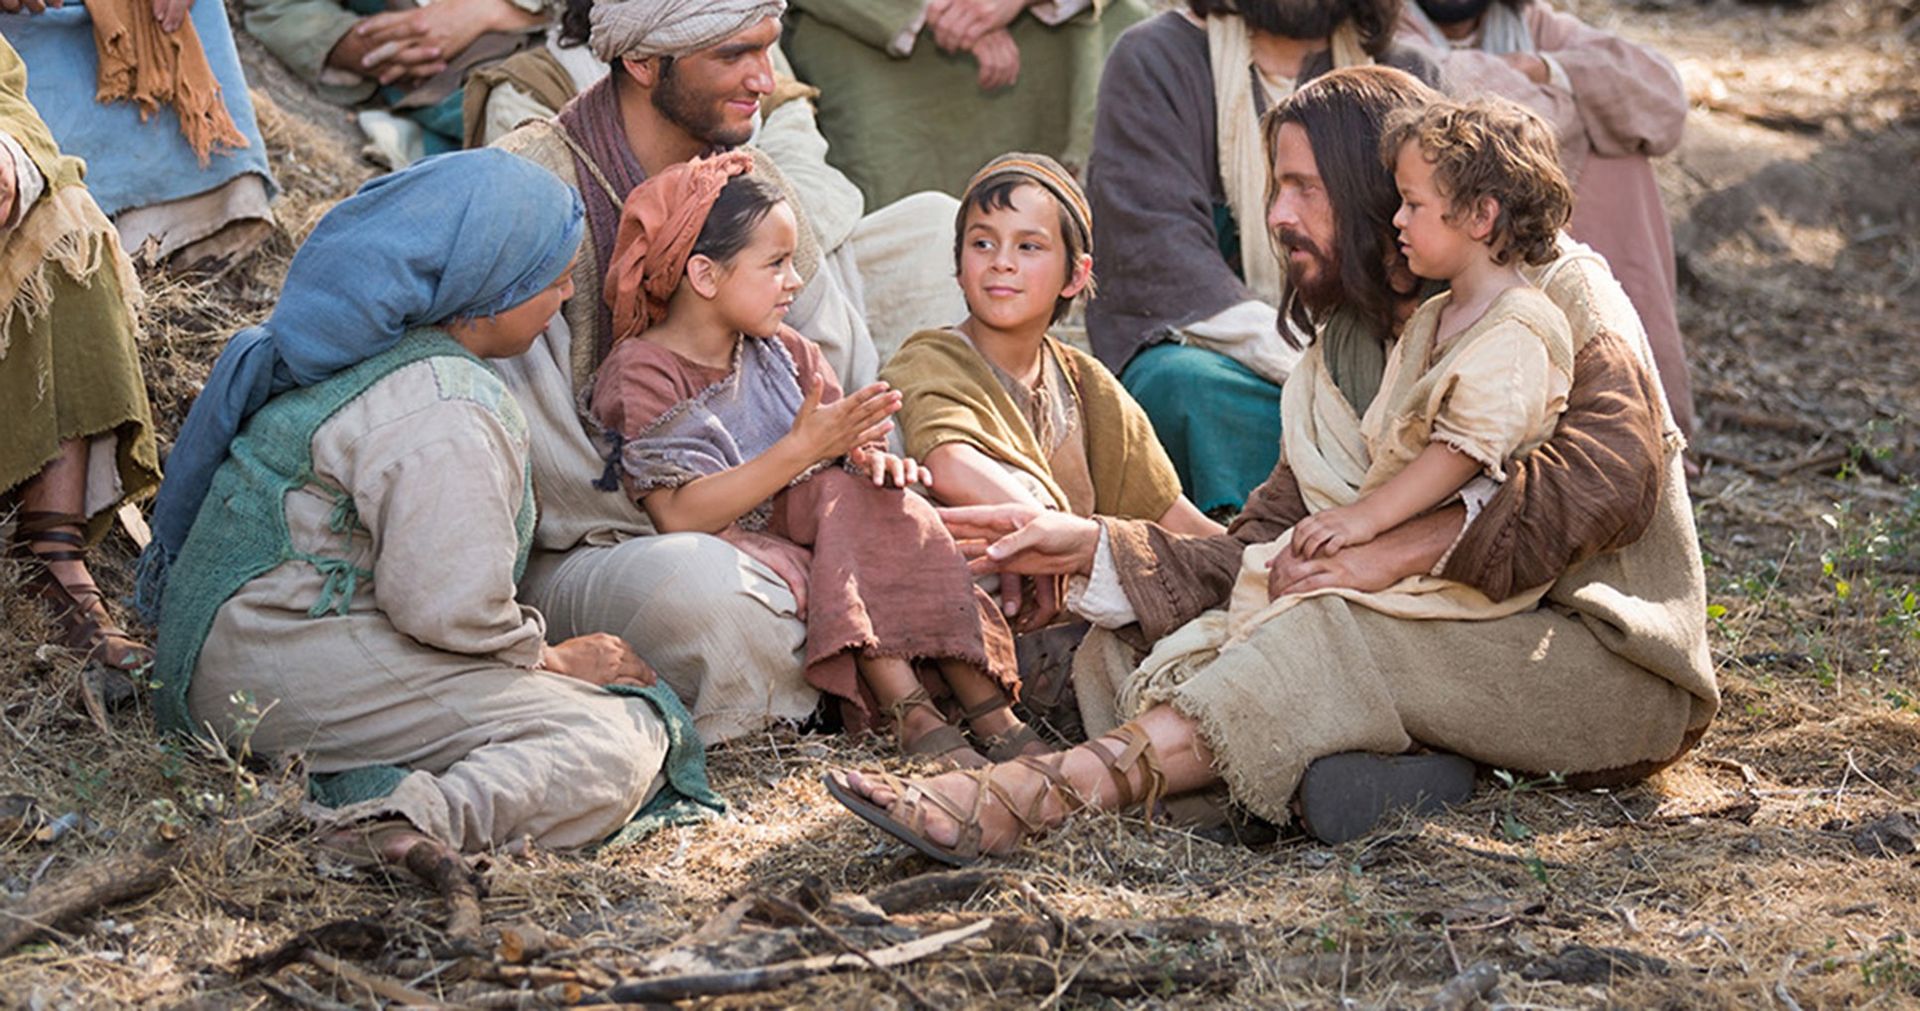 Jesus sitting on the ground with a young family, speaking directly to one child while holding another on His lap.